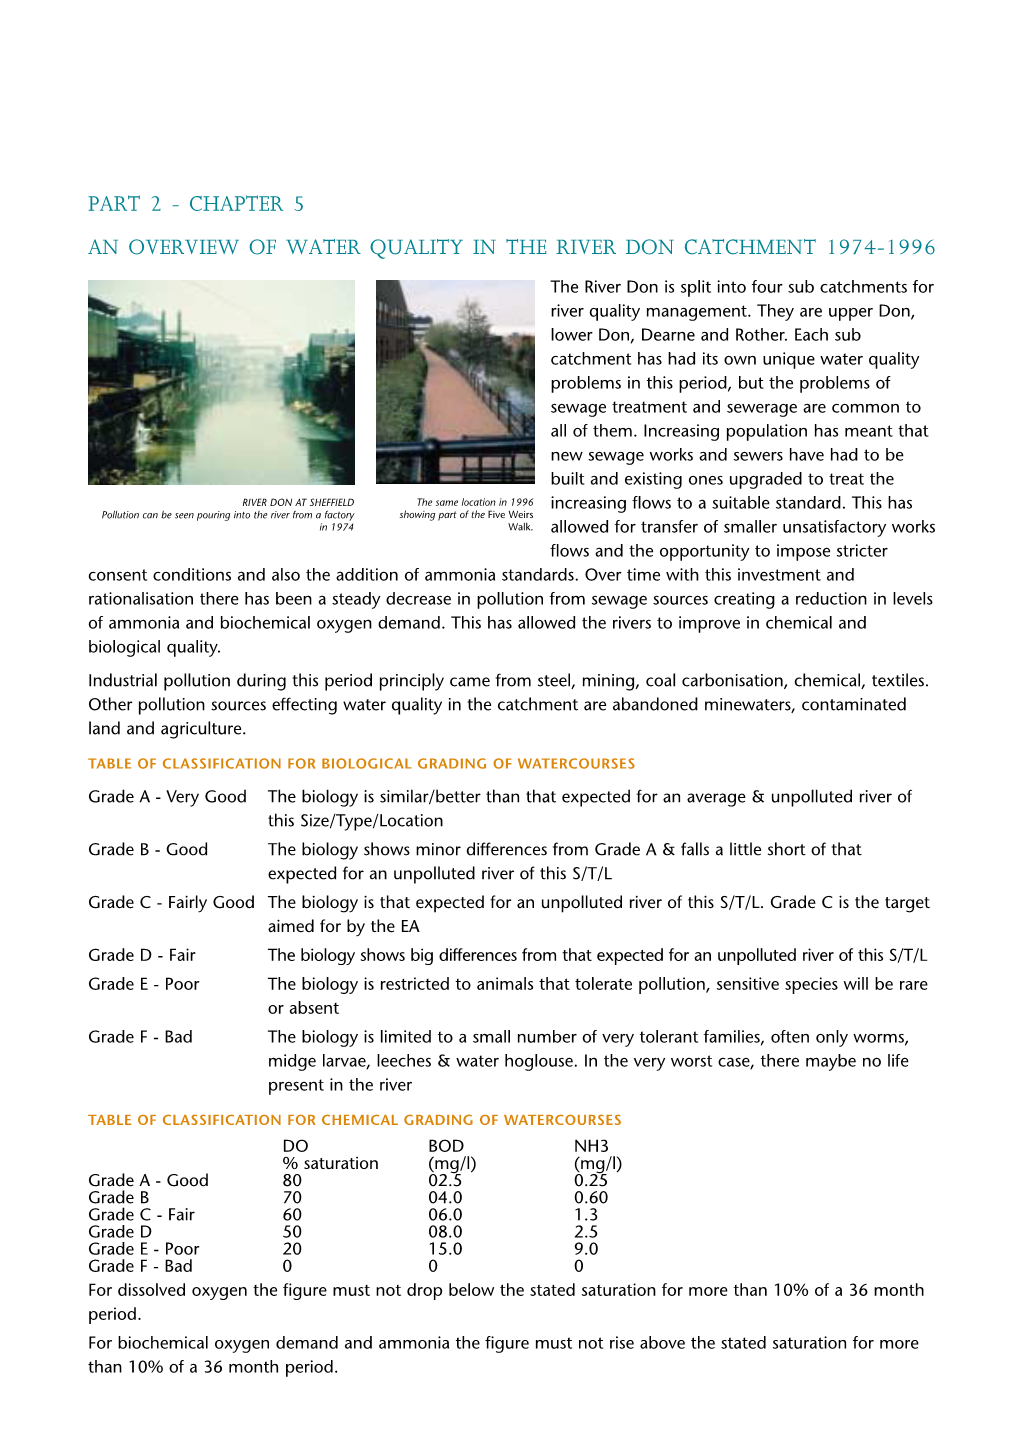 Part 2 - Chapter 5 an Overview of Water Quality in the River Don Catchment 1974-1996